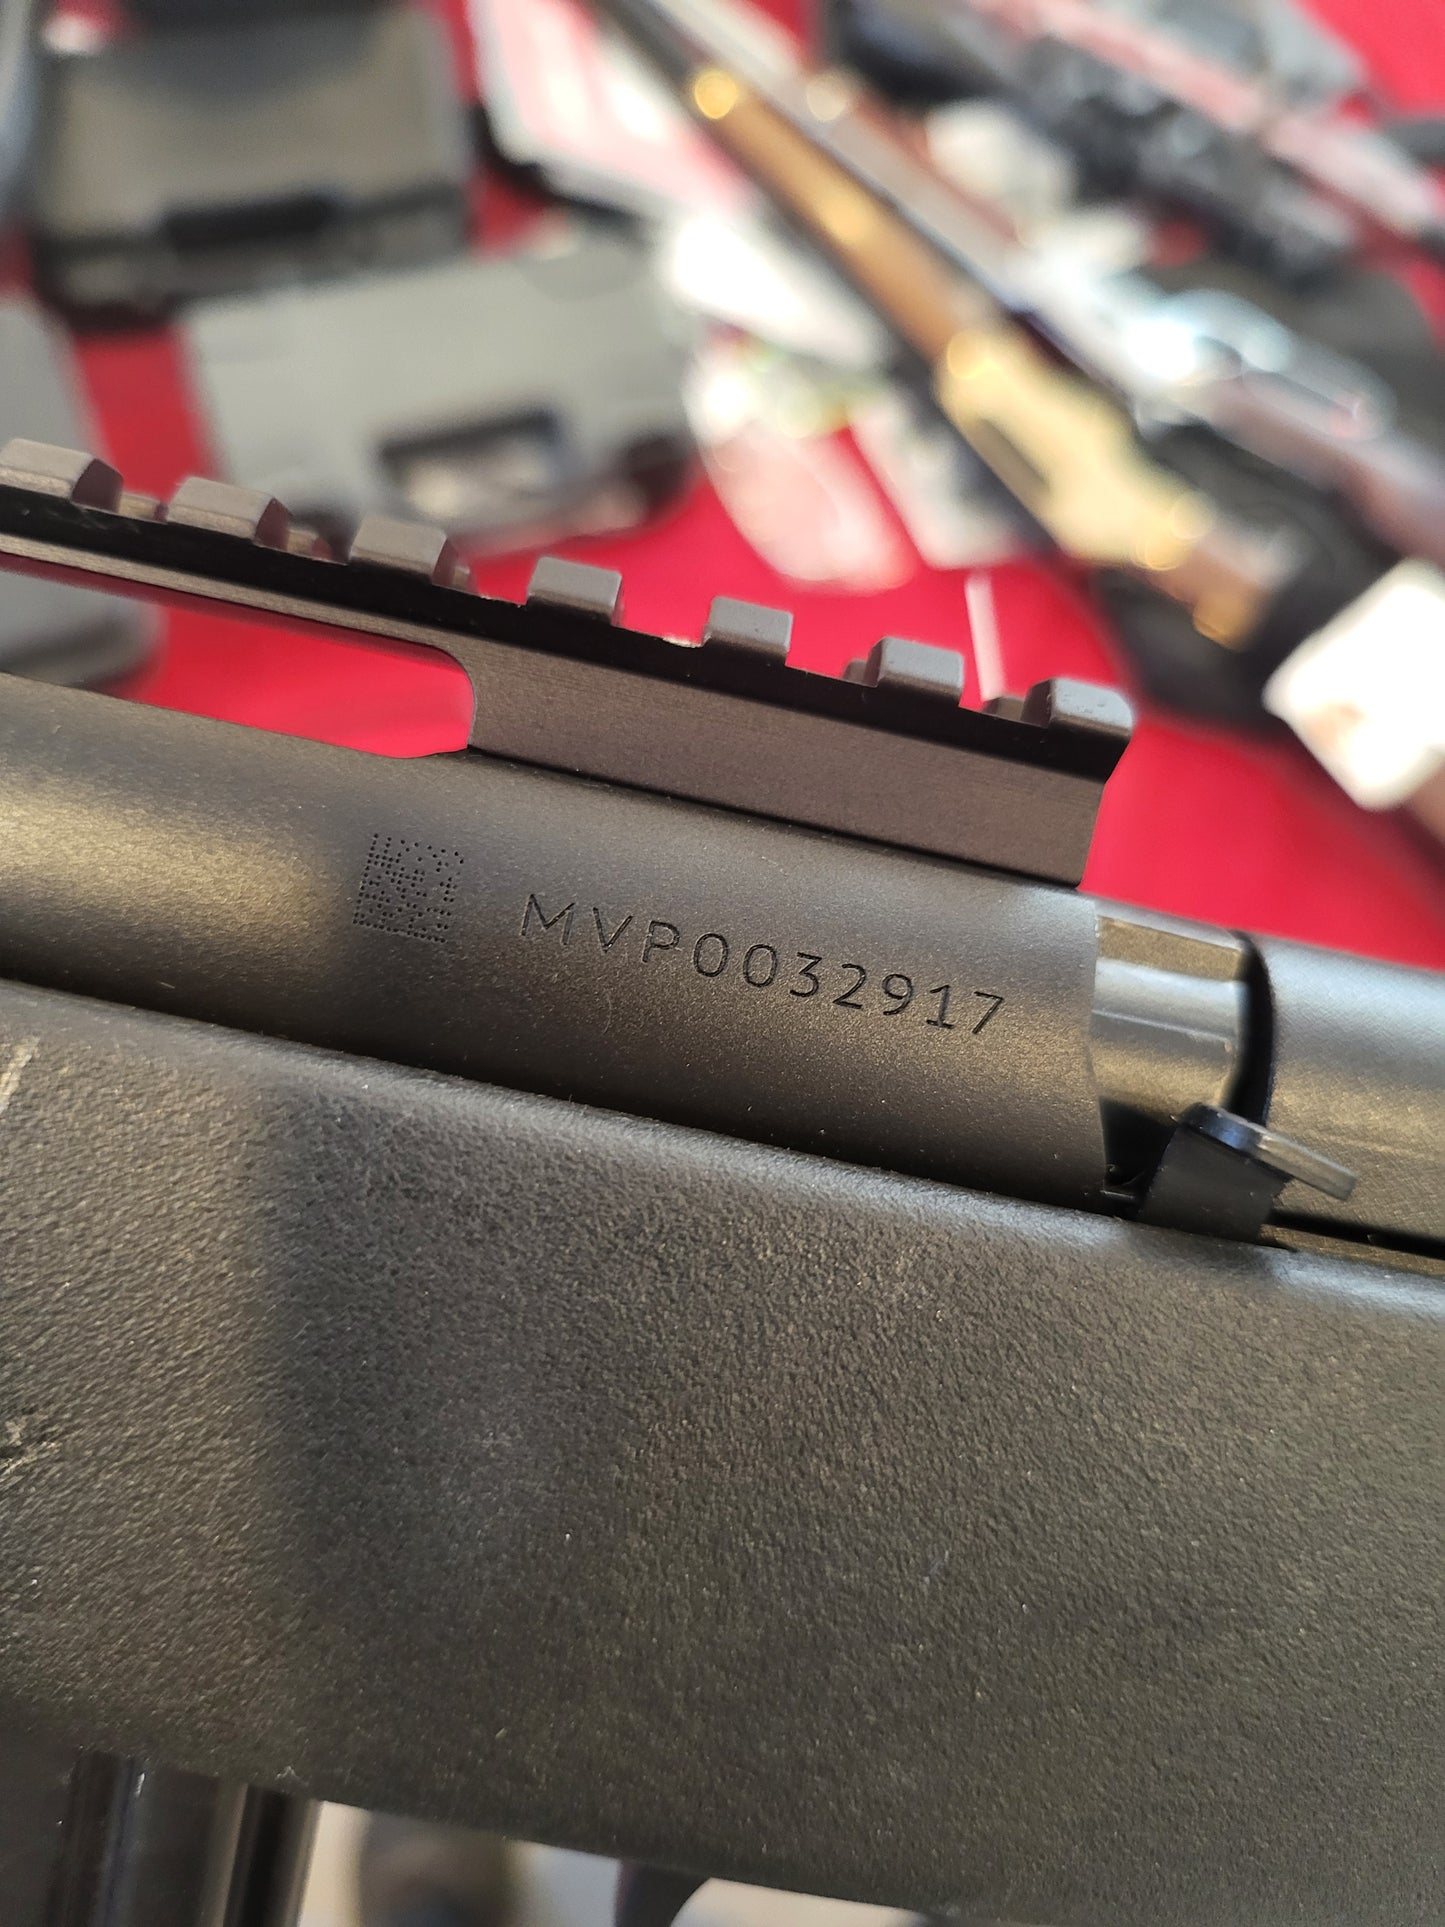 Mossberg MVP Patrol .300 AAC Blackout Bolt Action Rifle 10 round mag